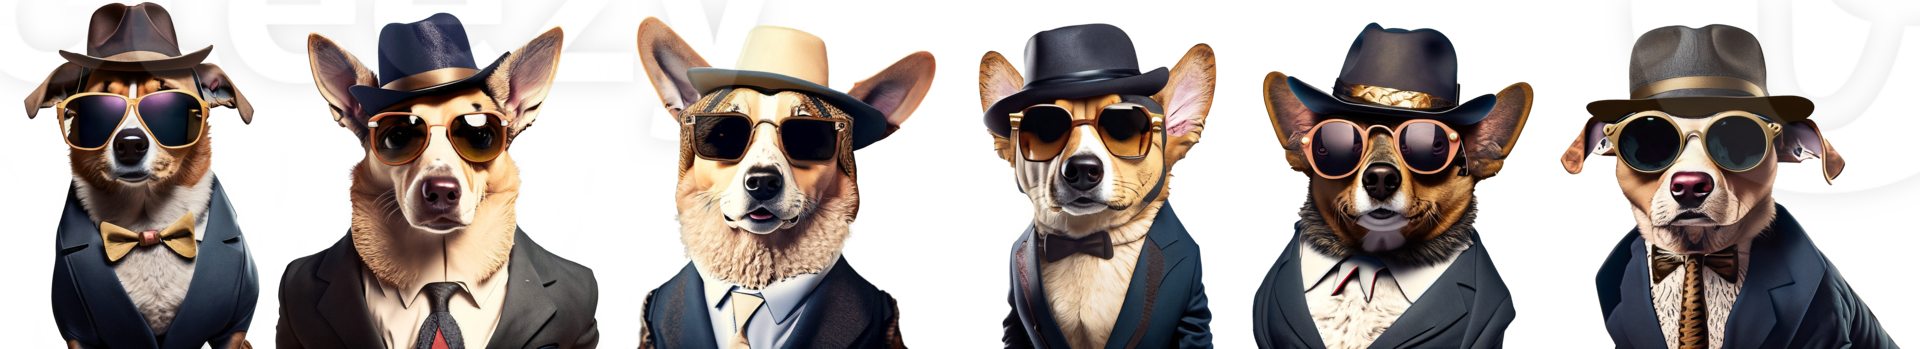 Cool Dogs on Suit png